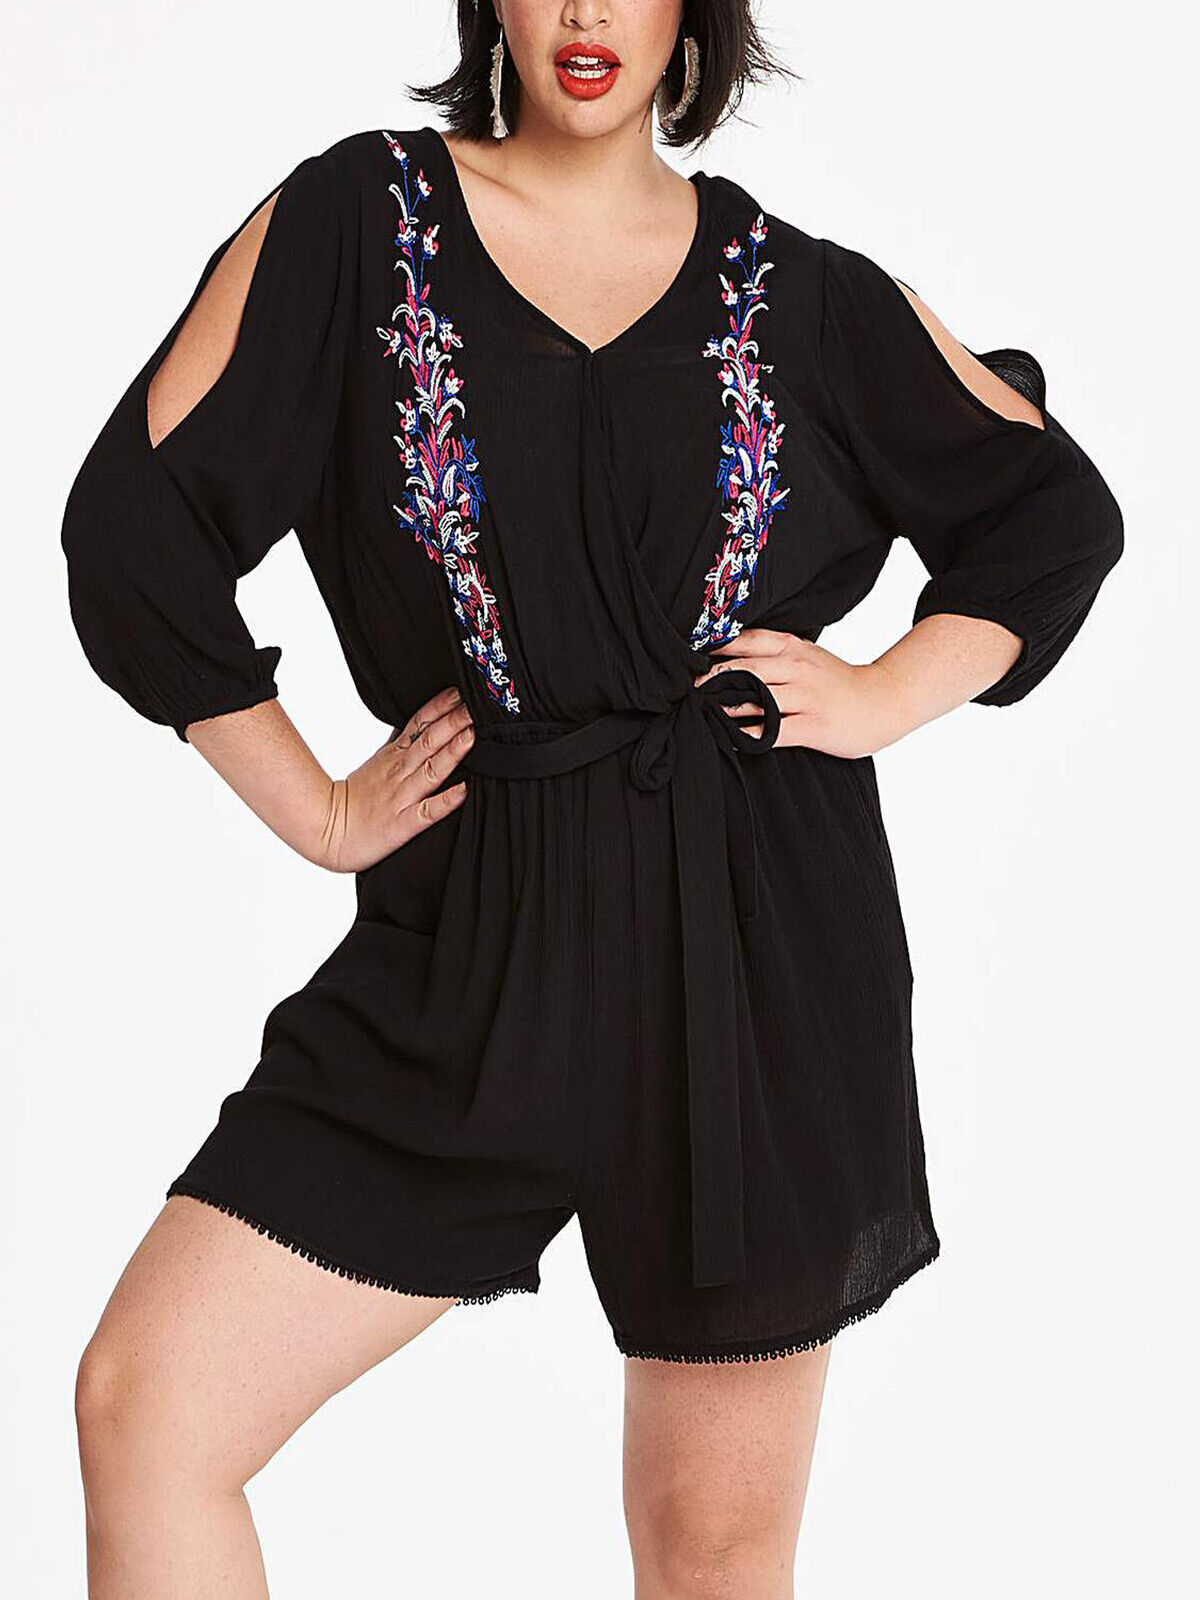 New Simply Be Black Embroidered Split Sleeve Playsuit in Size 12